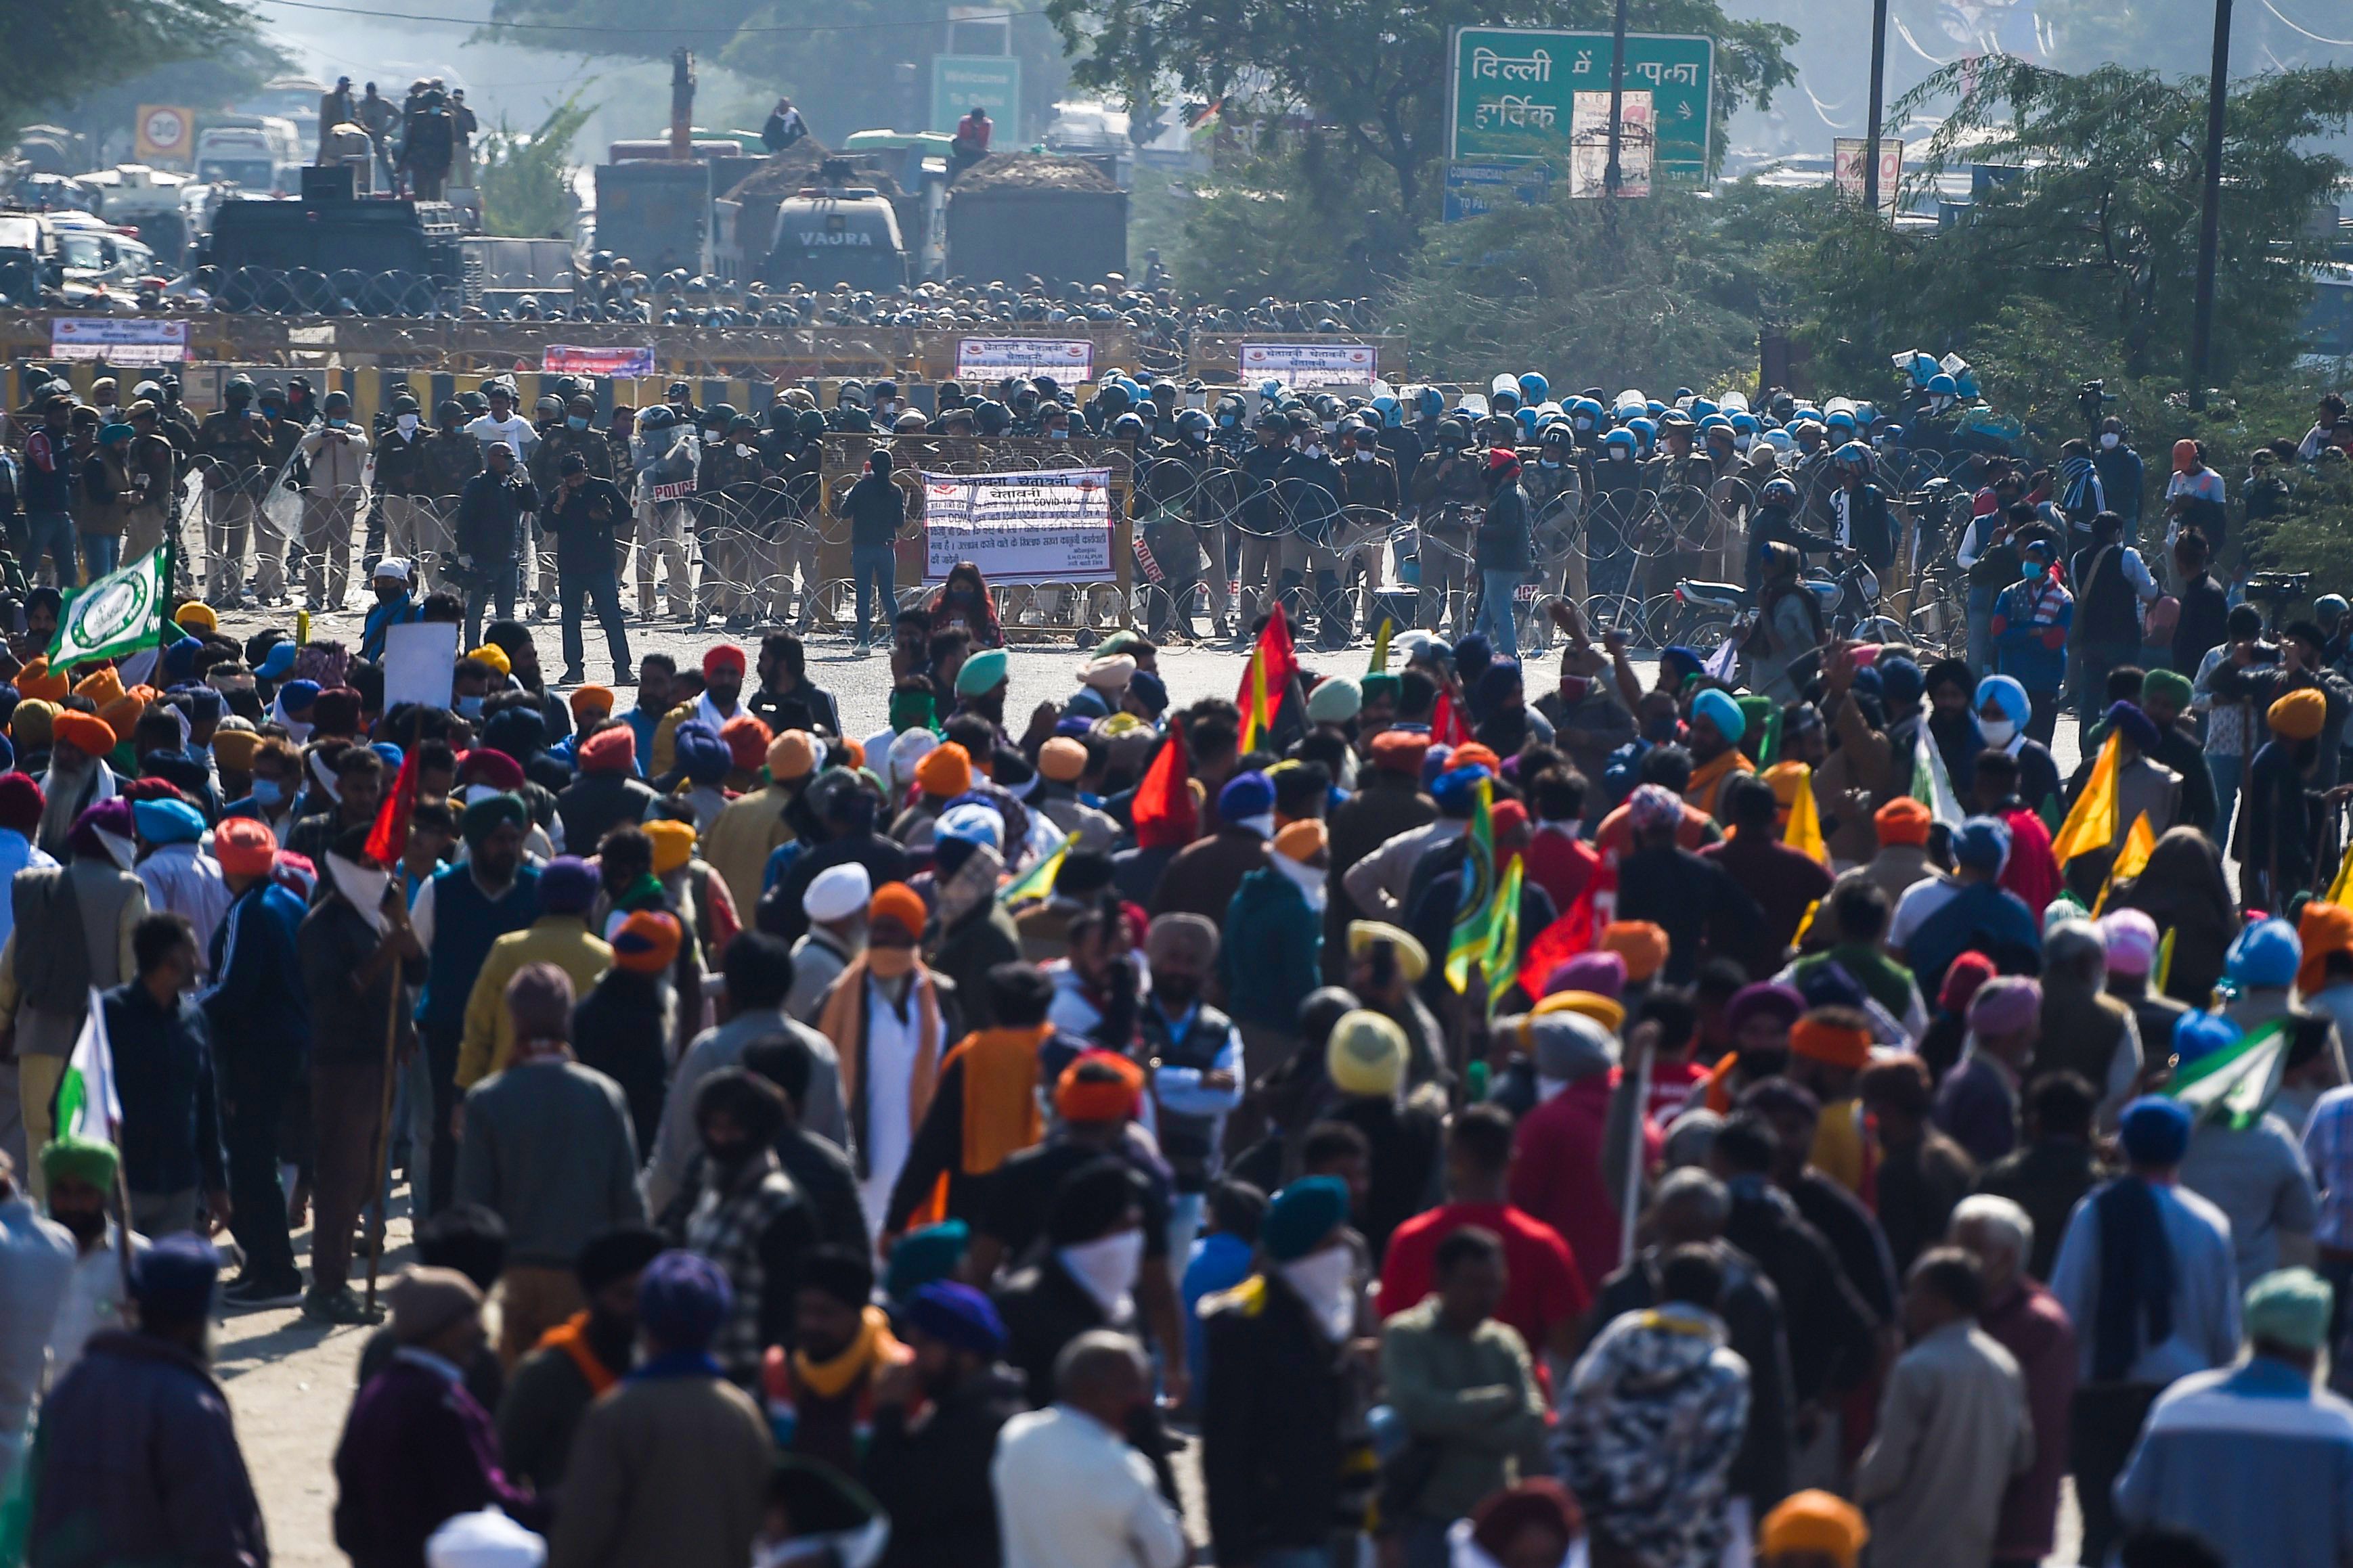 Police block a street to impede farmers from marching to New Delhi to protest against the central government's recent agricultural reforms at the Delhi-Haryana border in Kundli on November 27, 2020.